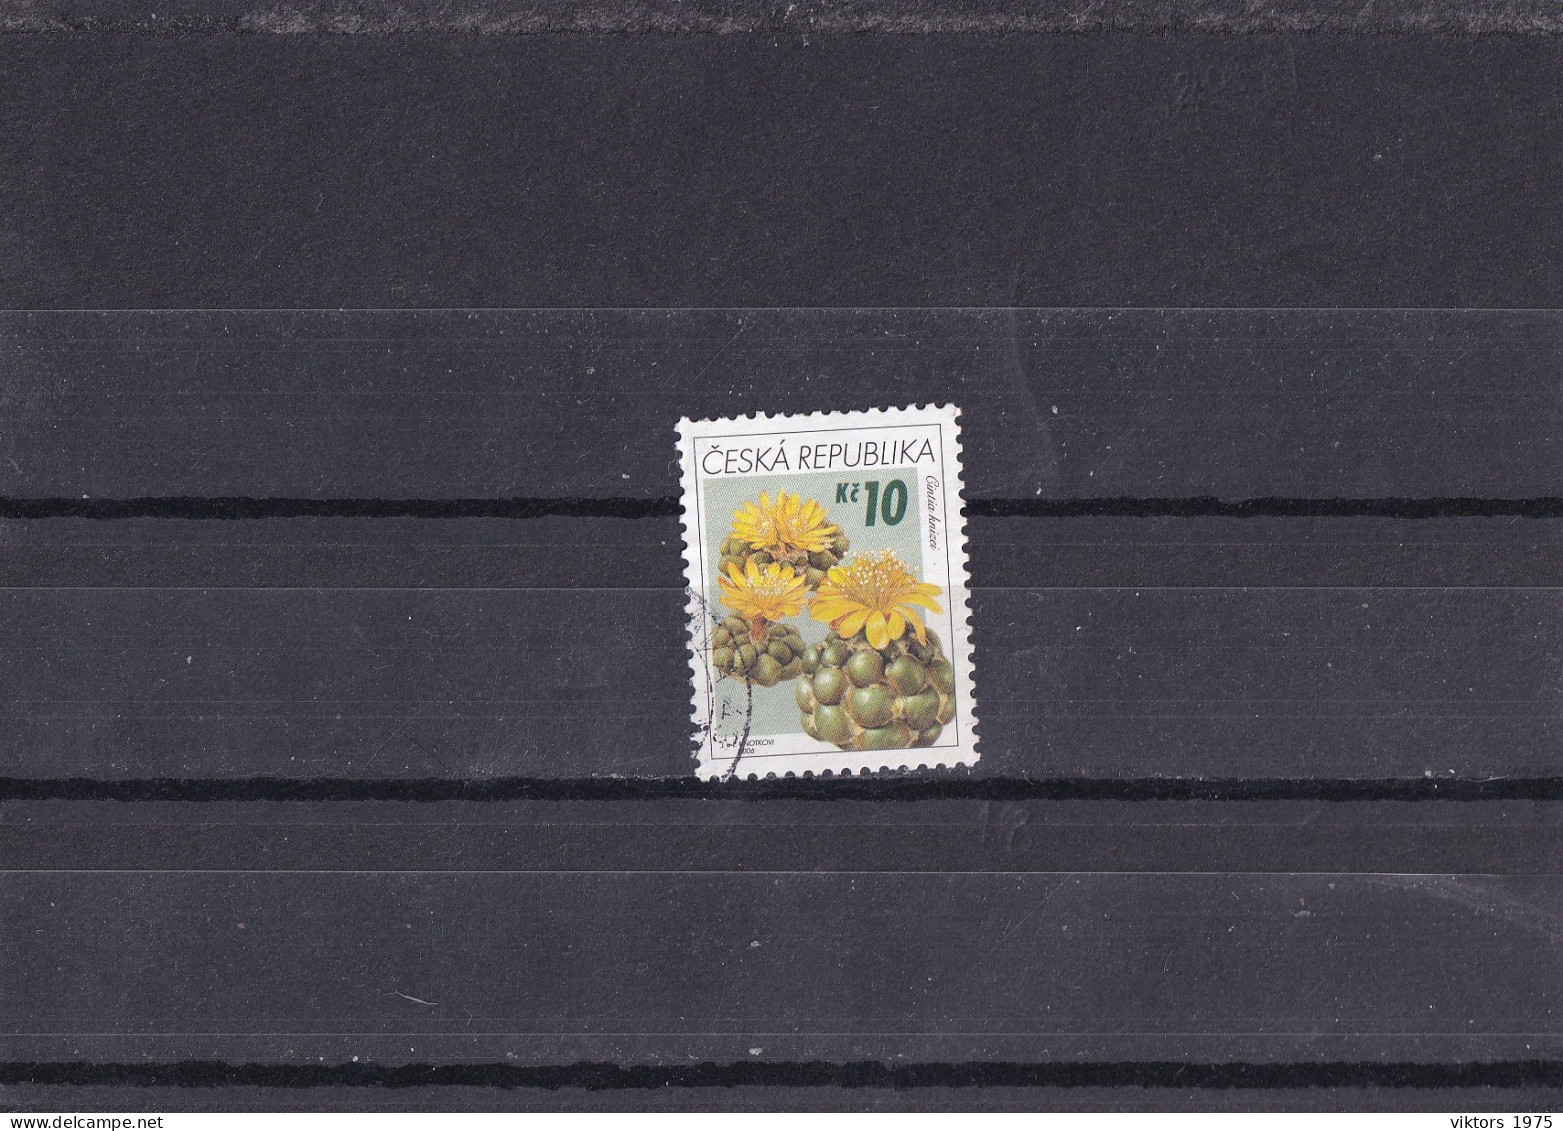 Used Stamp Nr.486 In MICHEL Catalog - Used Stamps